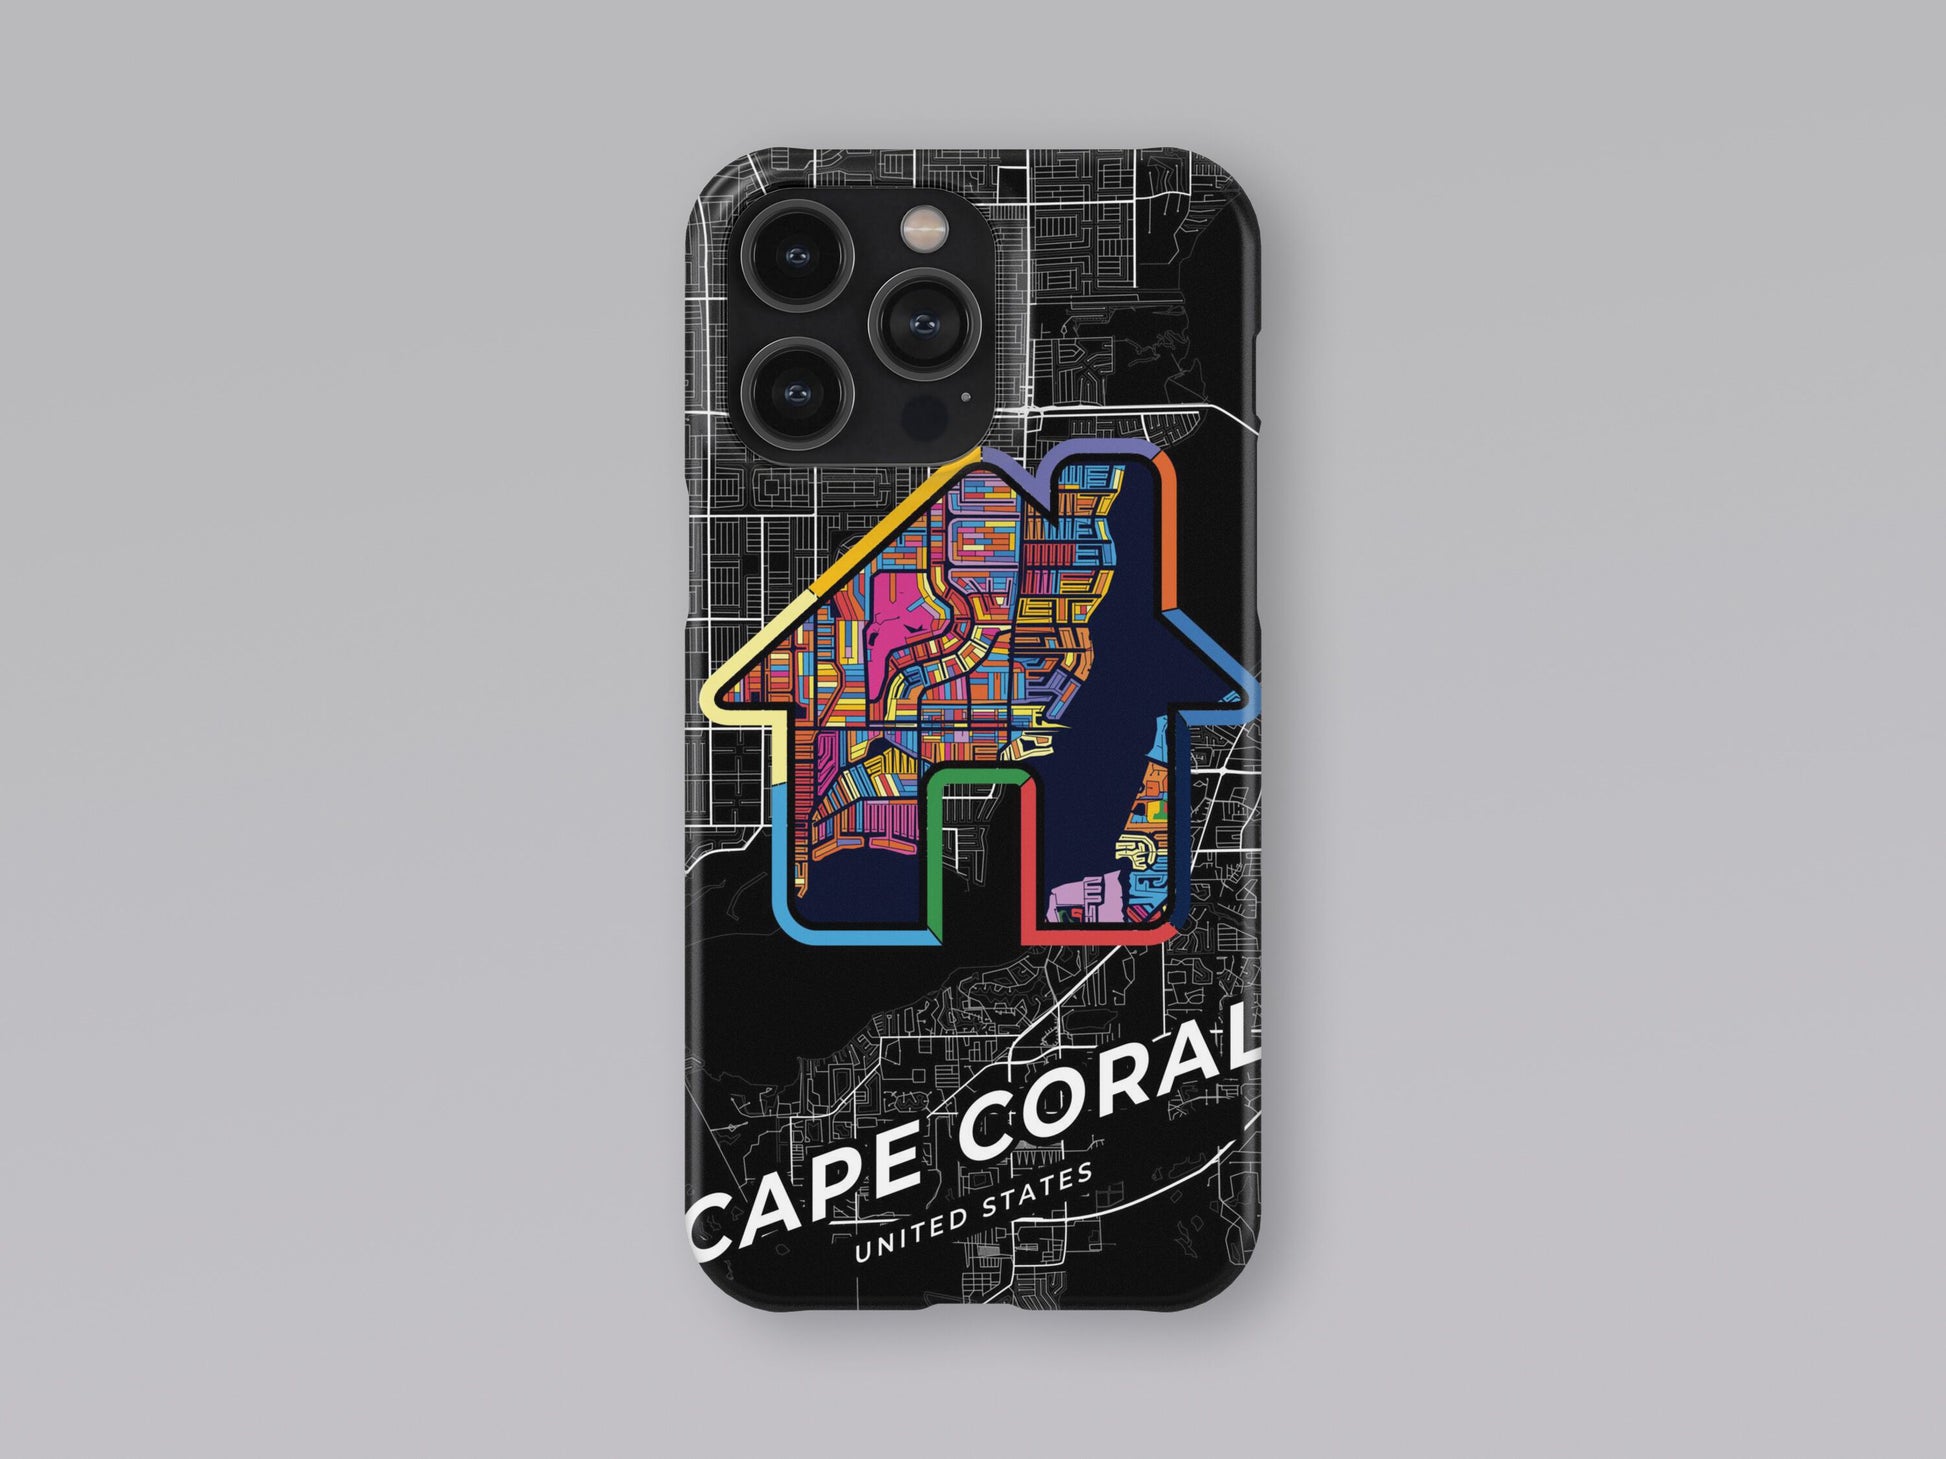 Cape Coral Florida slim phone case with colorful icon. Birthday, wedding or housewarming gift. Couple match cases. 3